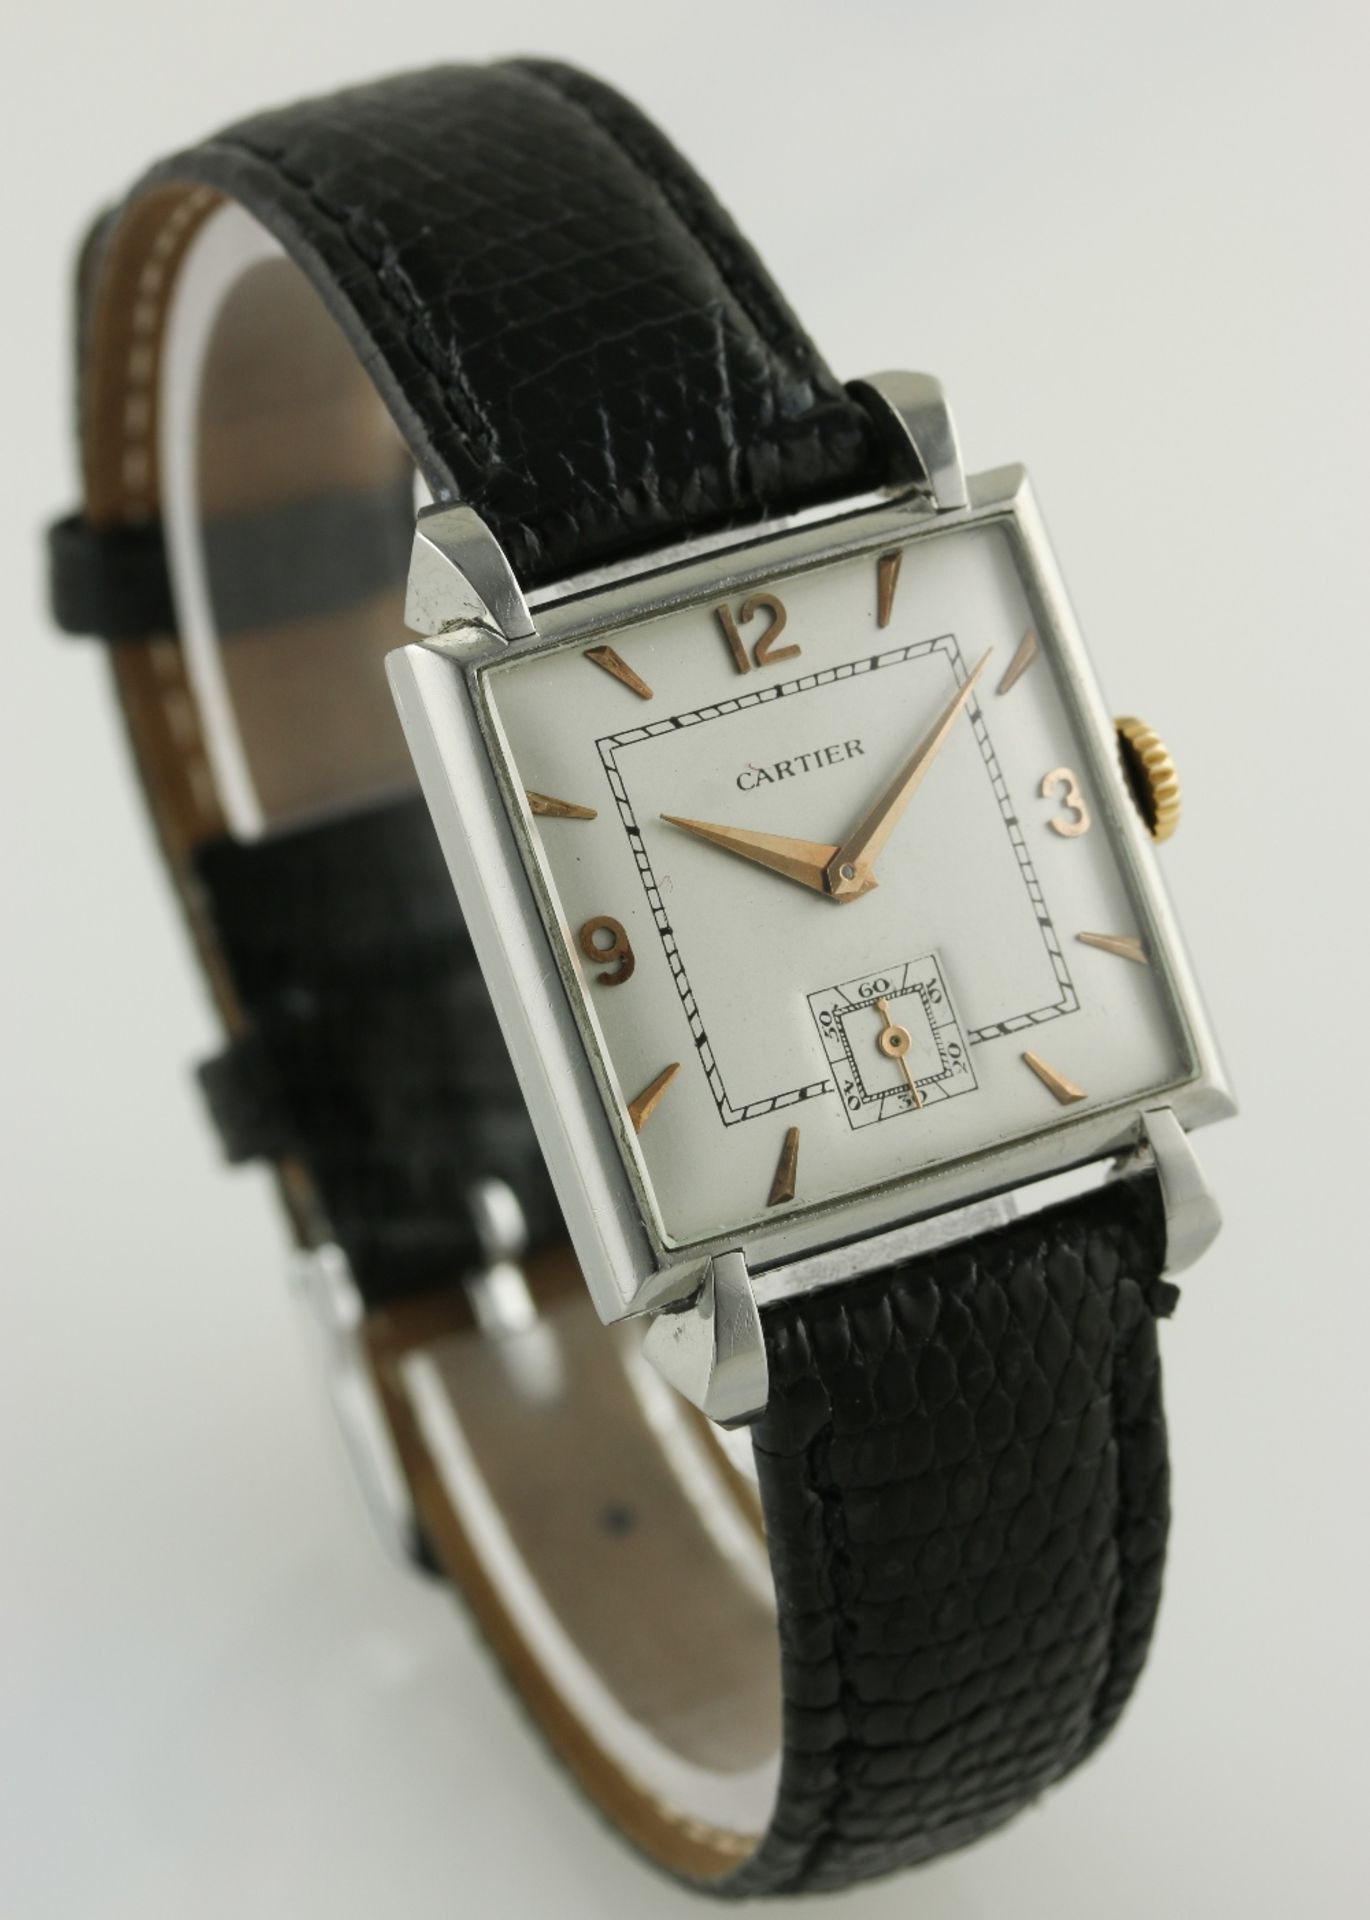 A GENTLEMAN'S STAINLESS STEEL CARTIER WRIST WATCH CIRCA 1950, MADE BY JAEGER-LECOULTRE D: Silver - Image 5 of 8